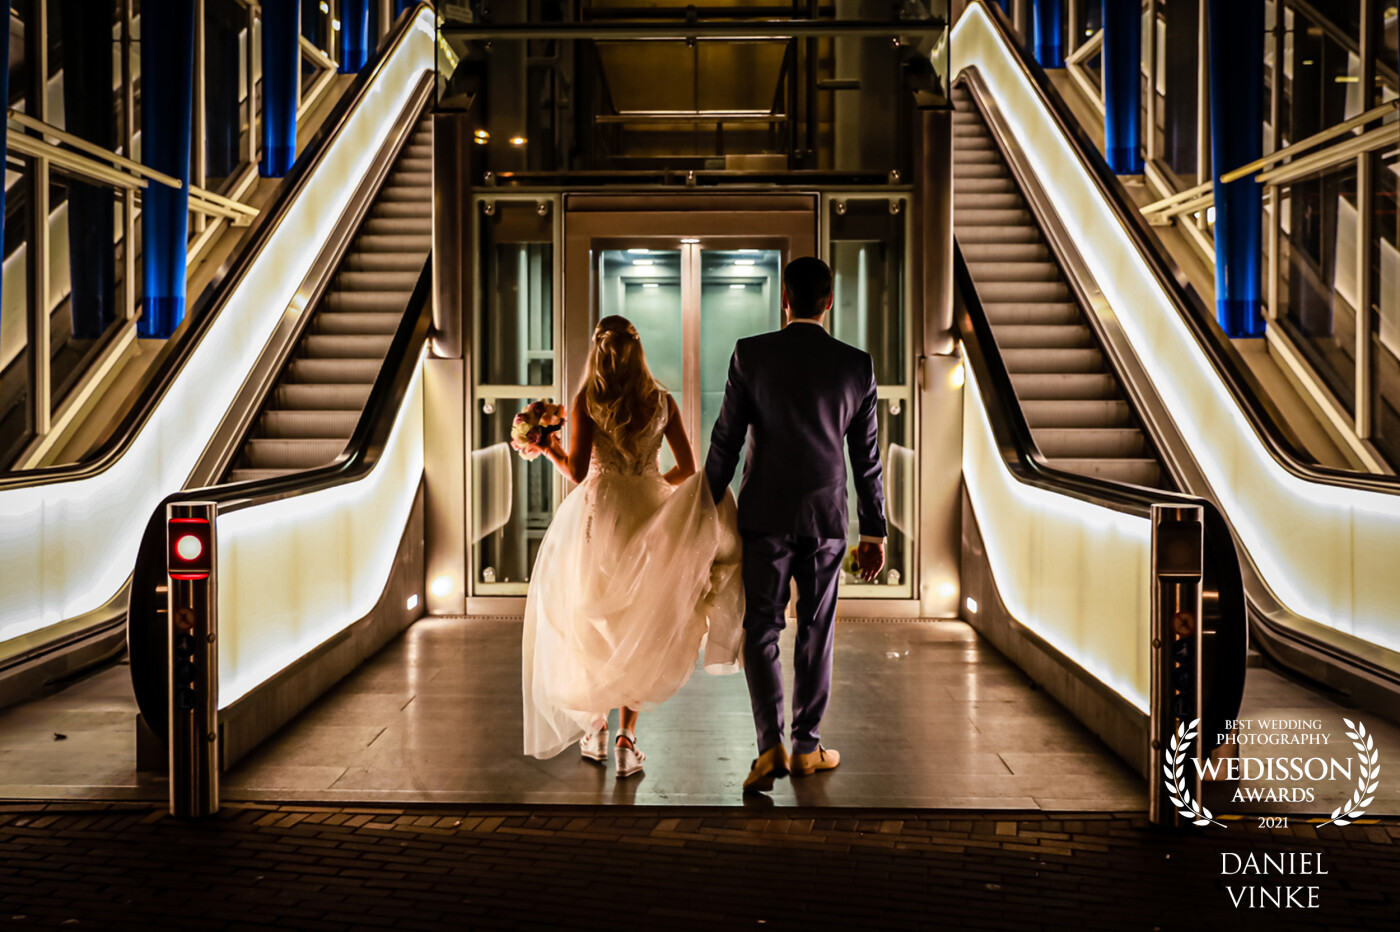 While we were traveling to the bridge for the photoshoot this lovely couple walked to the elevator. I was walking behind them and thought the lines and lighting were very nice here too. Then the groom picked up the train of the dress from the floor and that was just perfect!